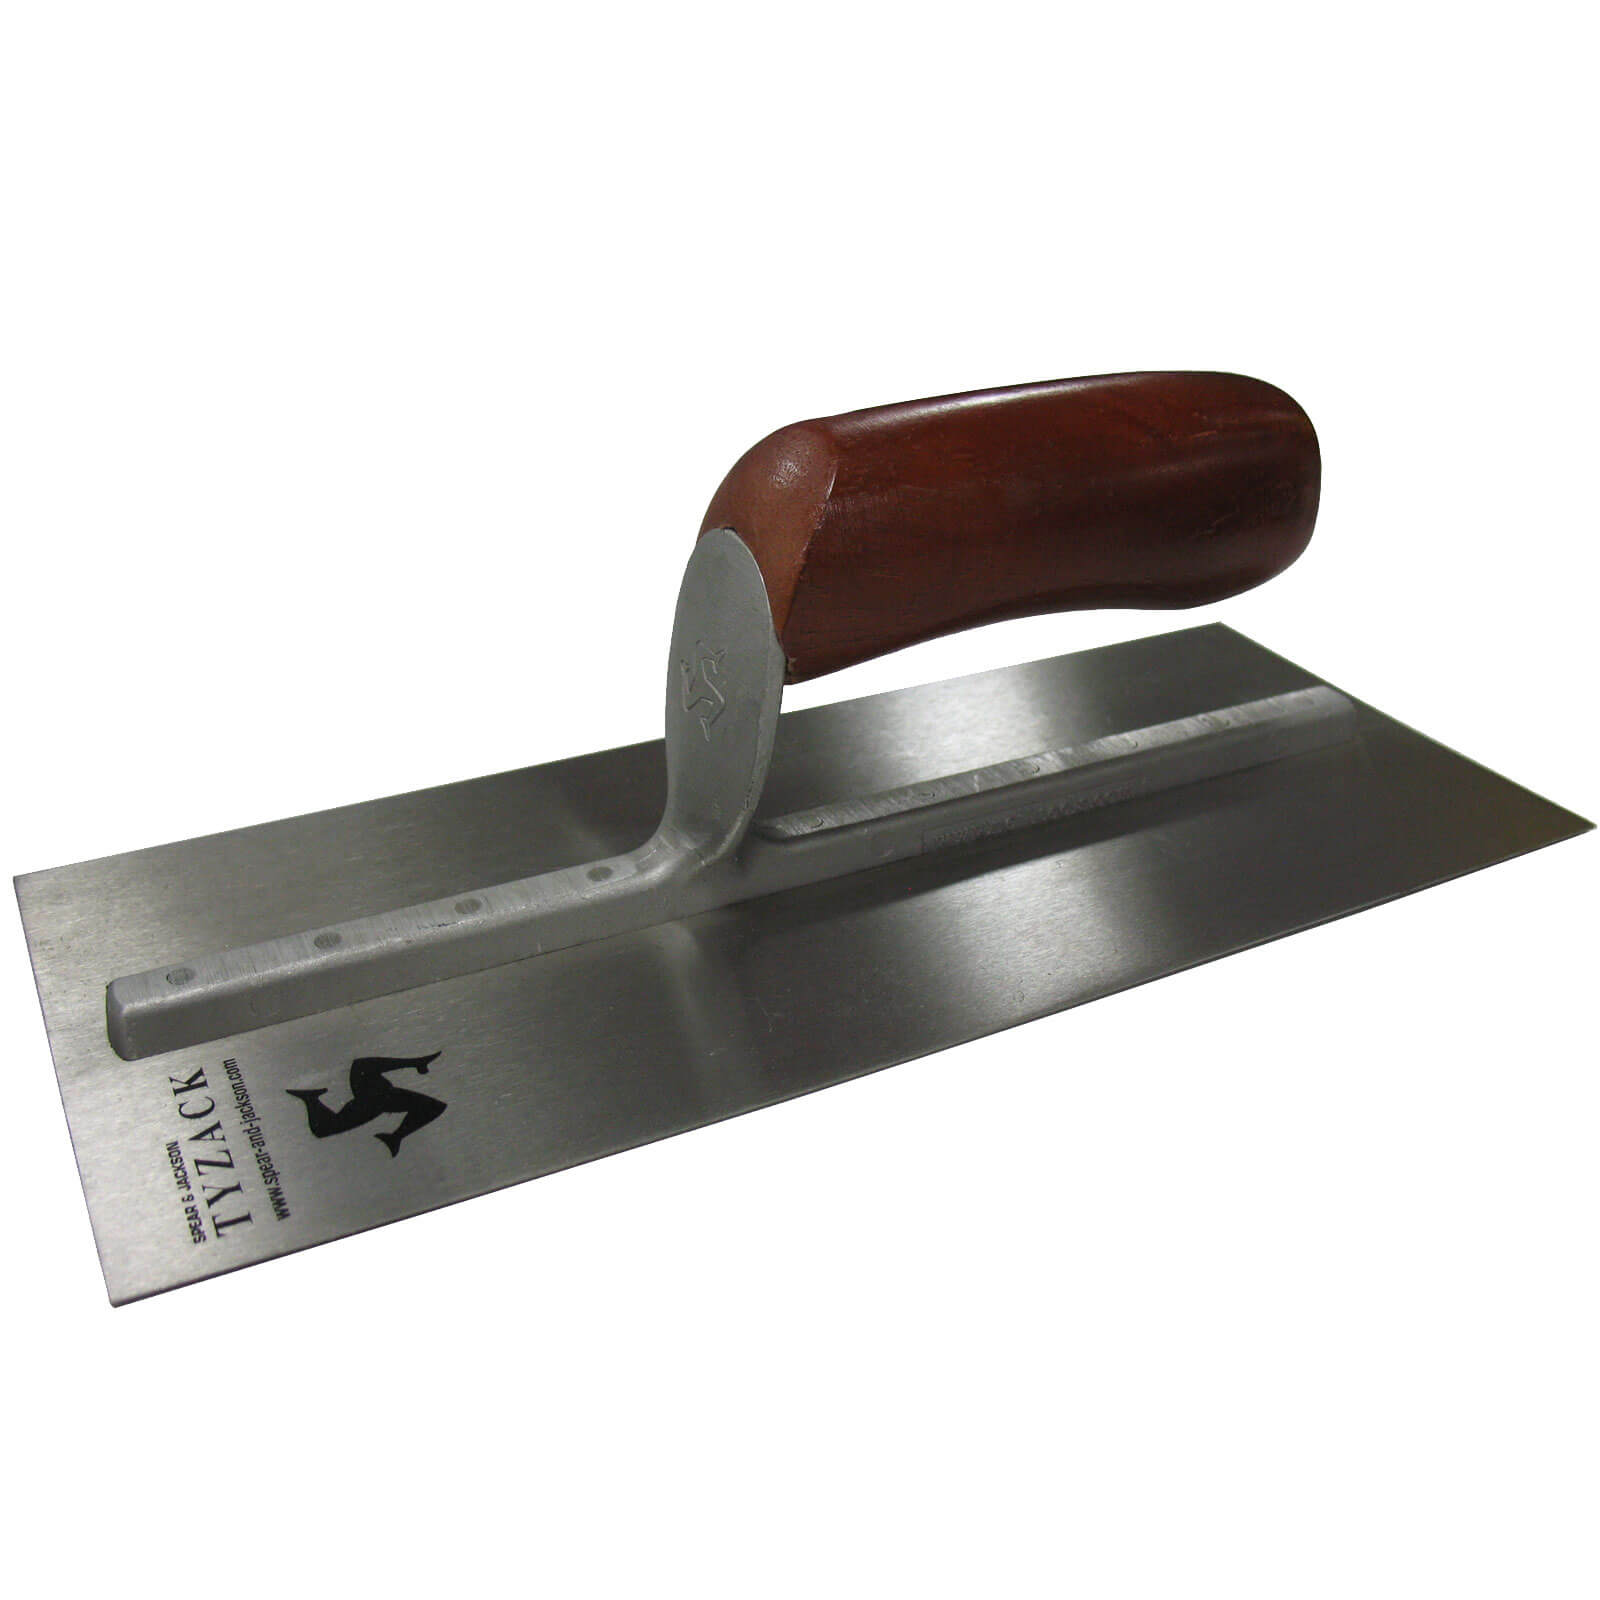 Image of Tyzack Stainless Steel Finishing Trowel 11" 4 5/8